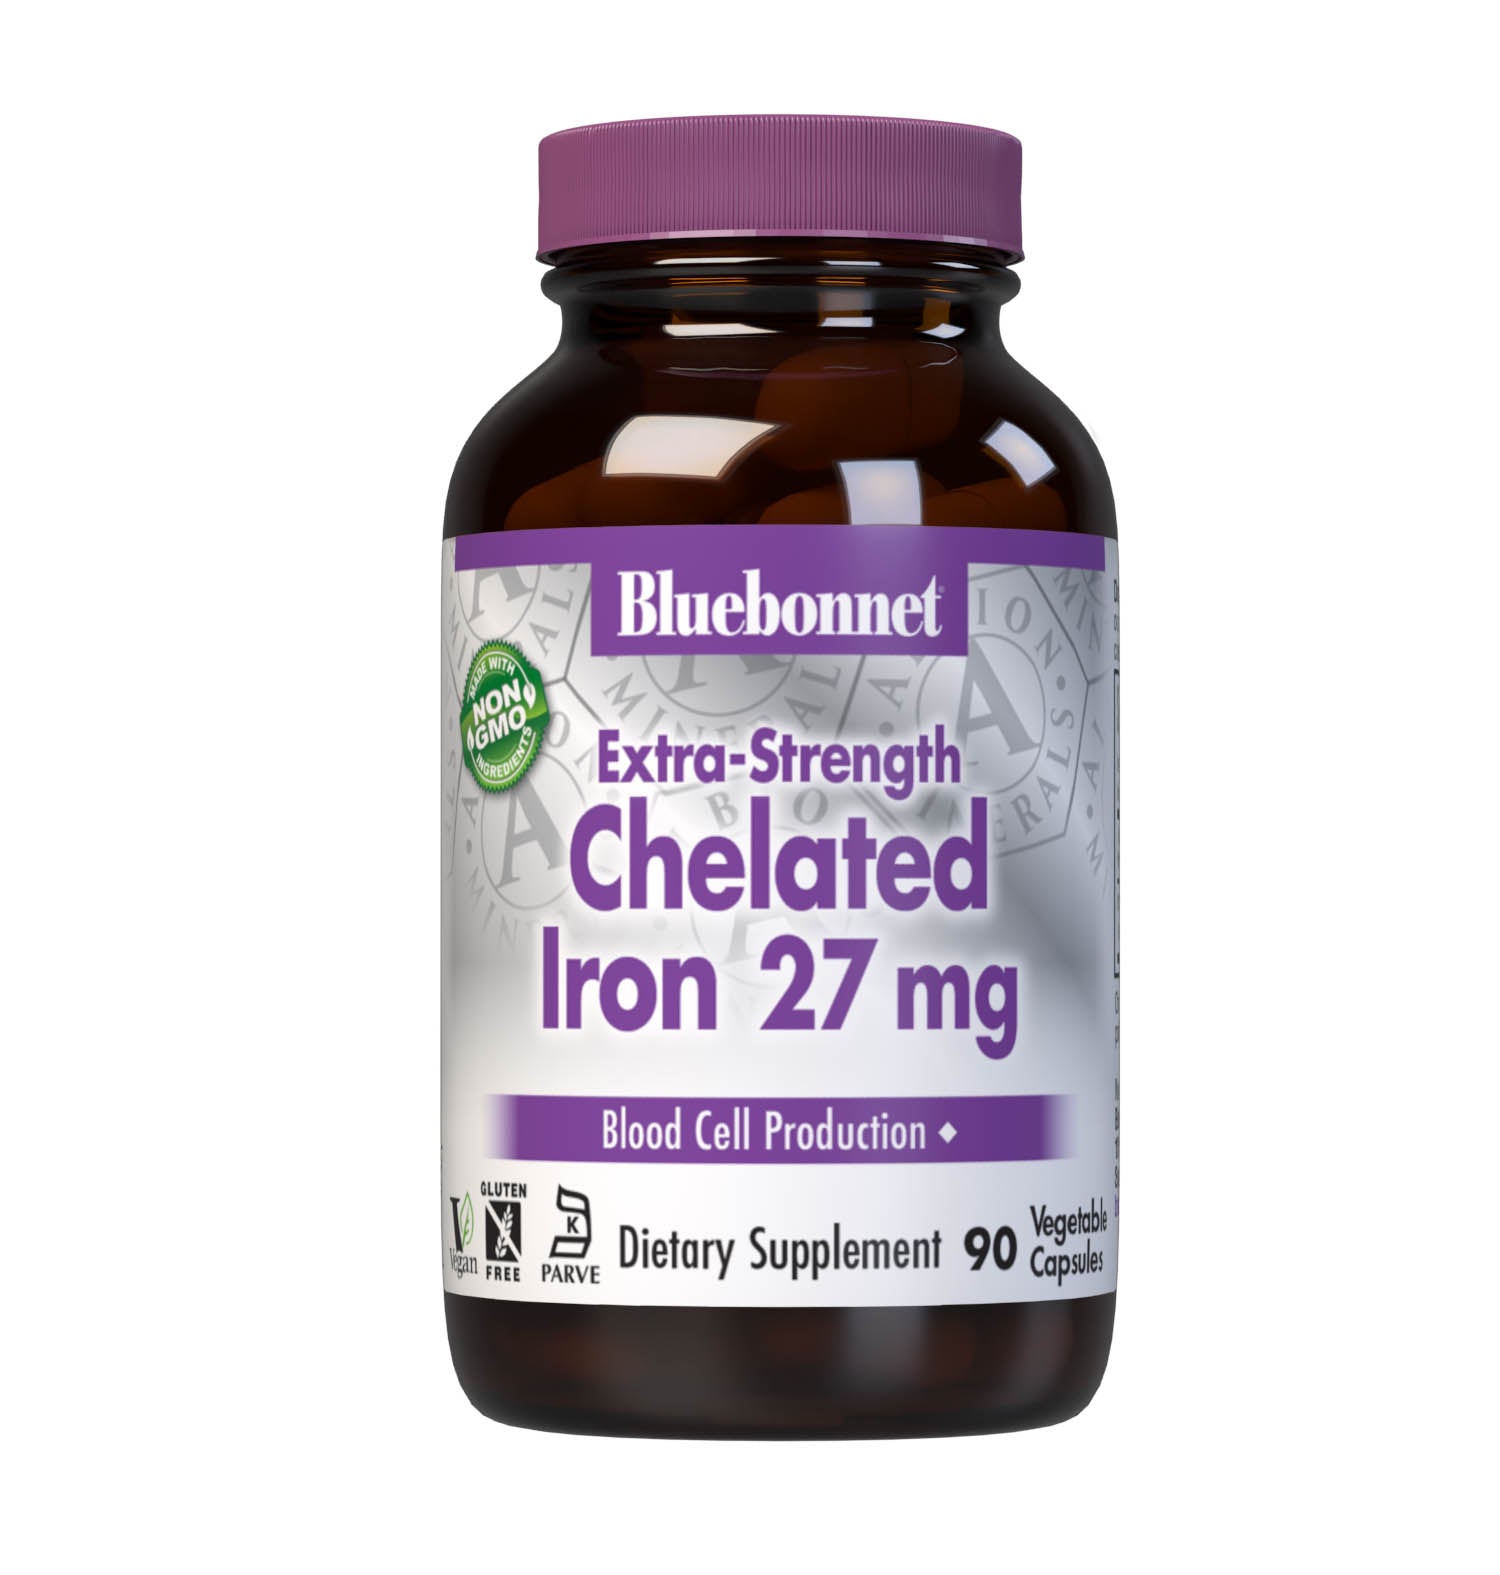 Bluebonnet's Extra-Strength Chelated Iron 27 mg 90 Vegetable Capsules are formulated with a gentle, non-constipating form of iron known as Ferrochel, a patented, fully reacted chelated ferrous bisglycinate from Albion. Iron is an essential element that is necessary for healthy red blood cell production as well as transferring oxygen throughout the body. #size_90 count